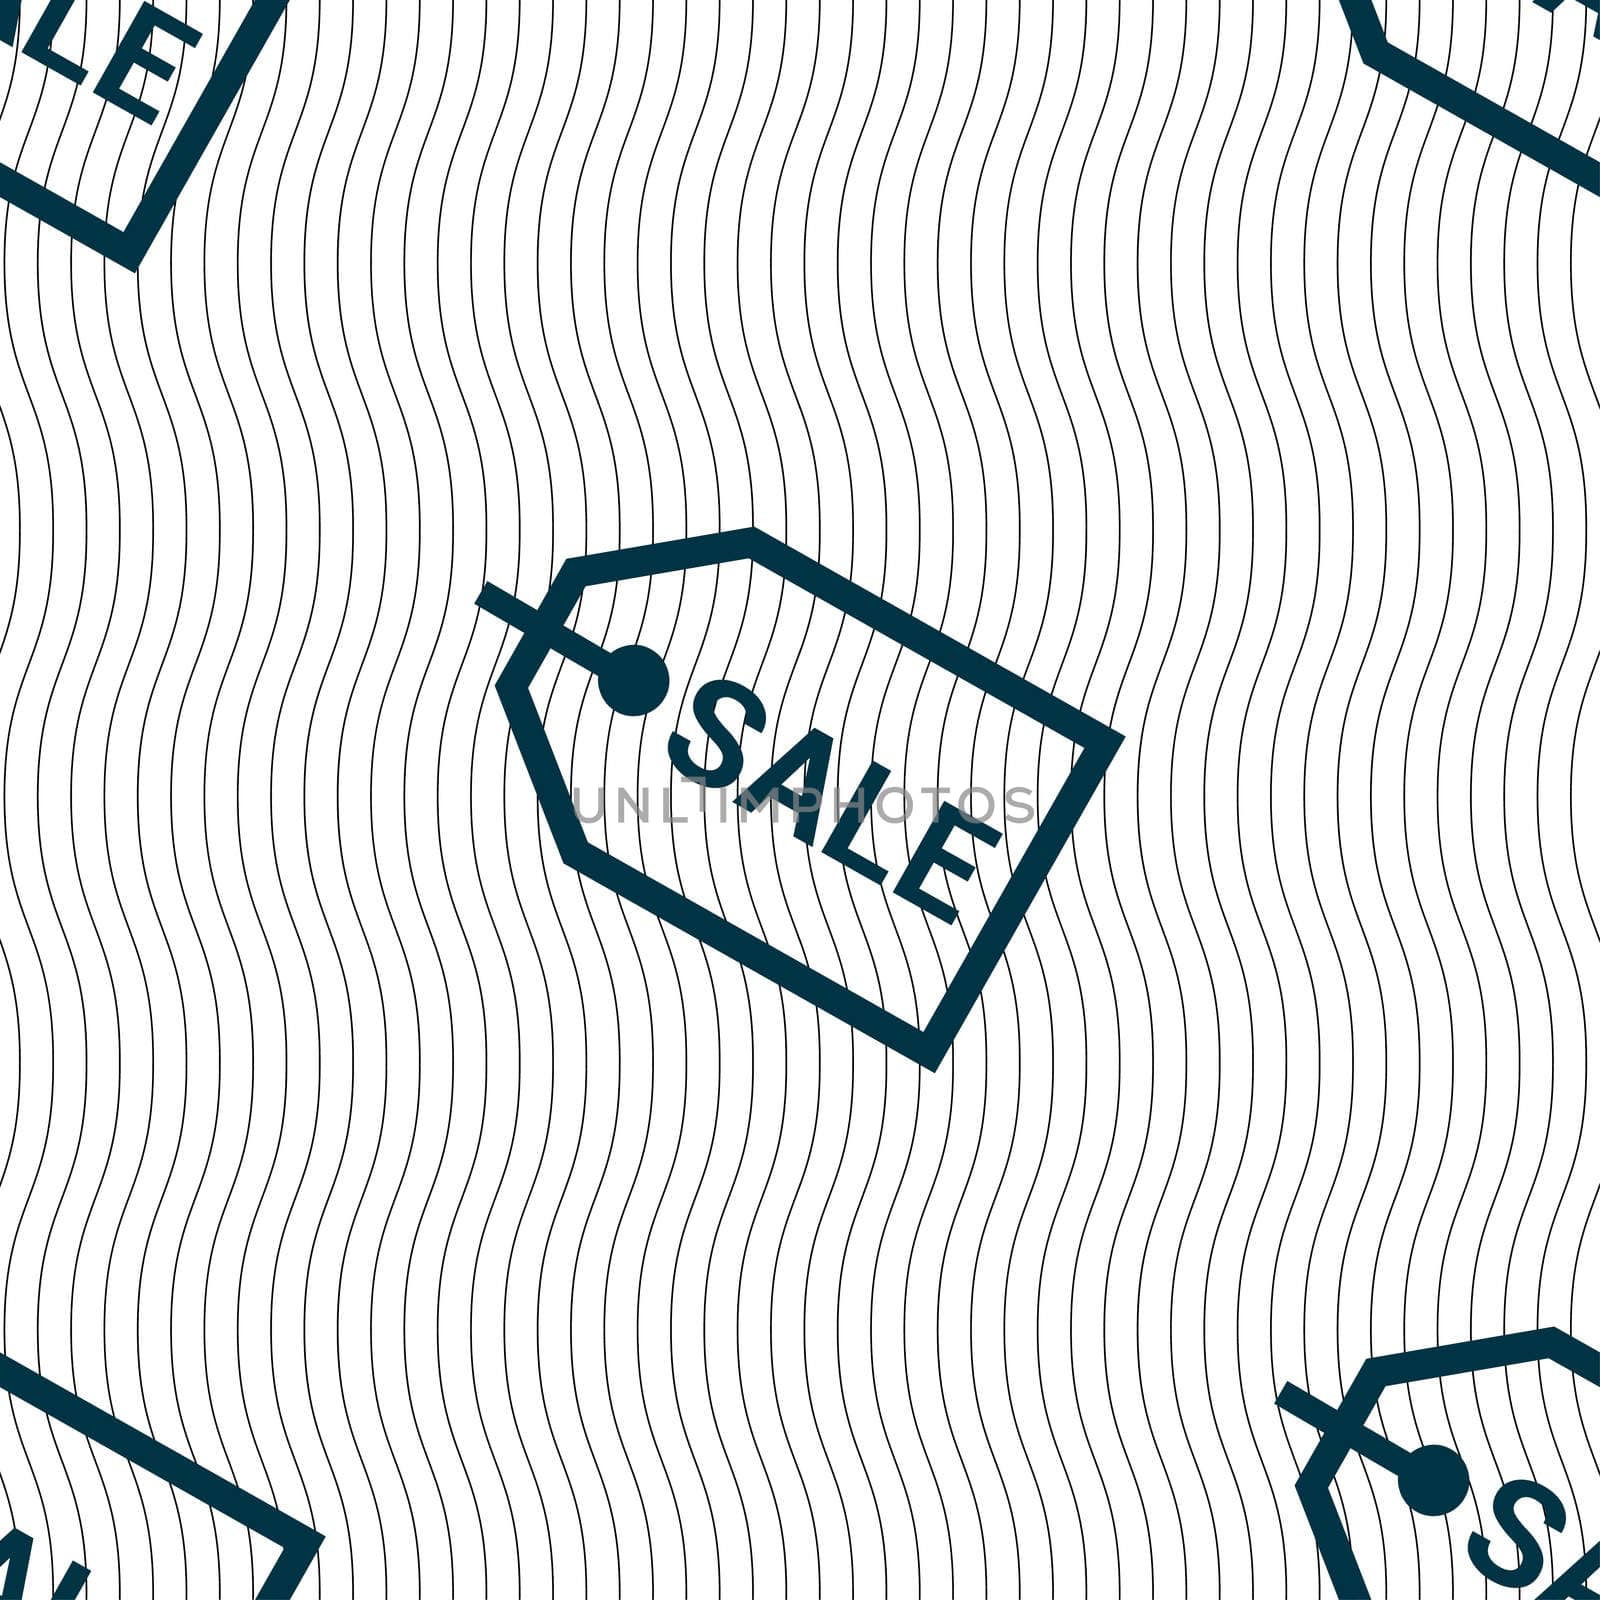 Sale icon sign. Seamless pattern with geometric texture. illustration